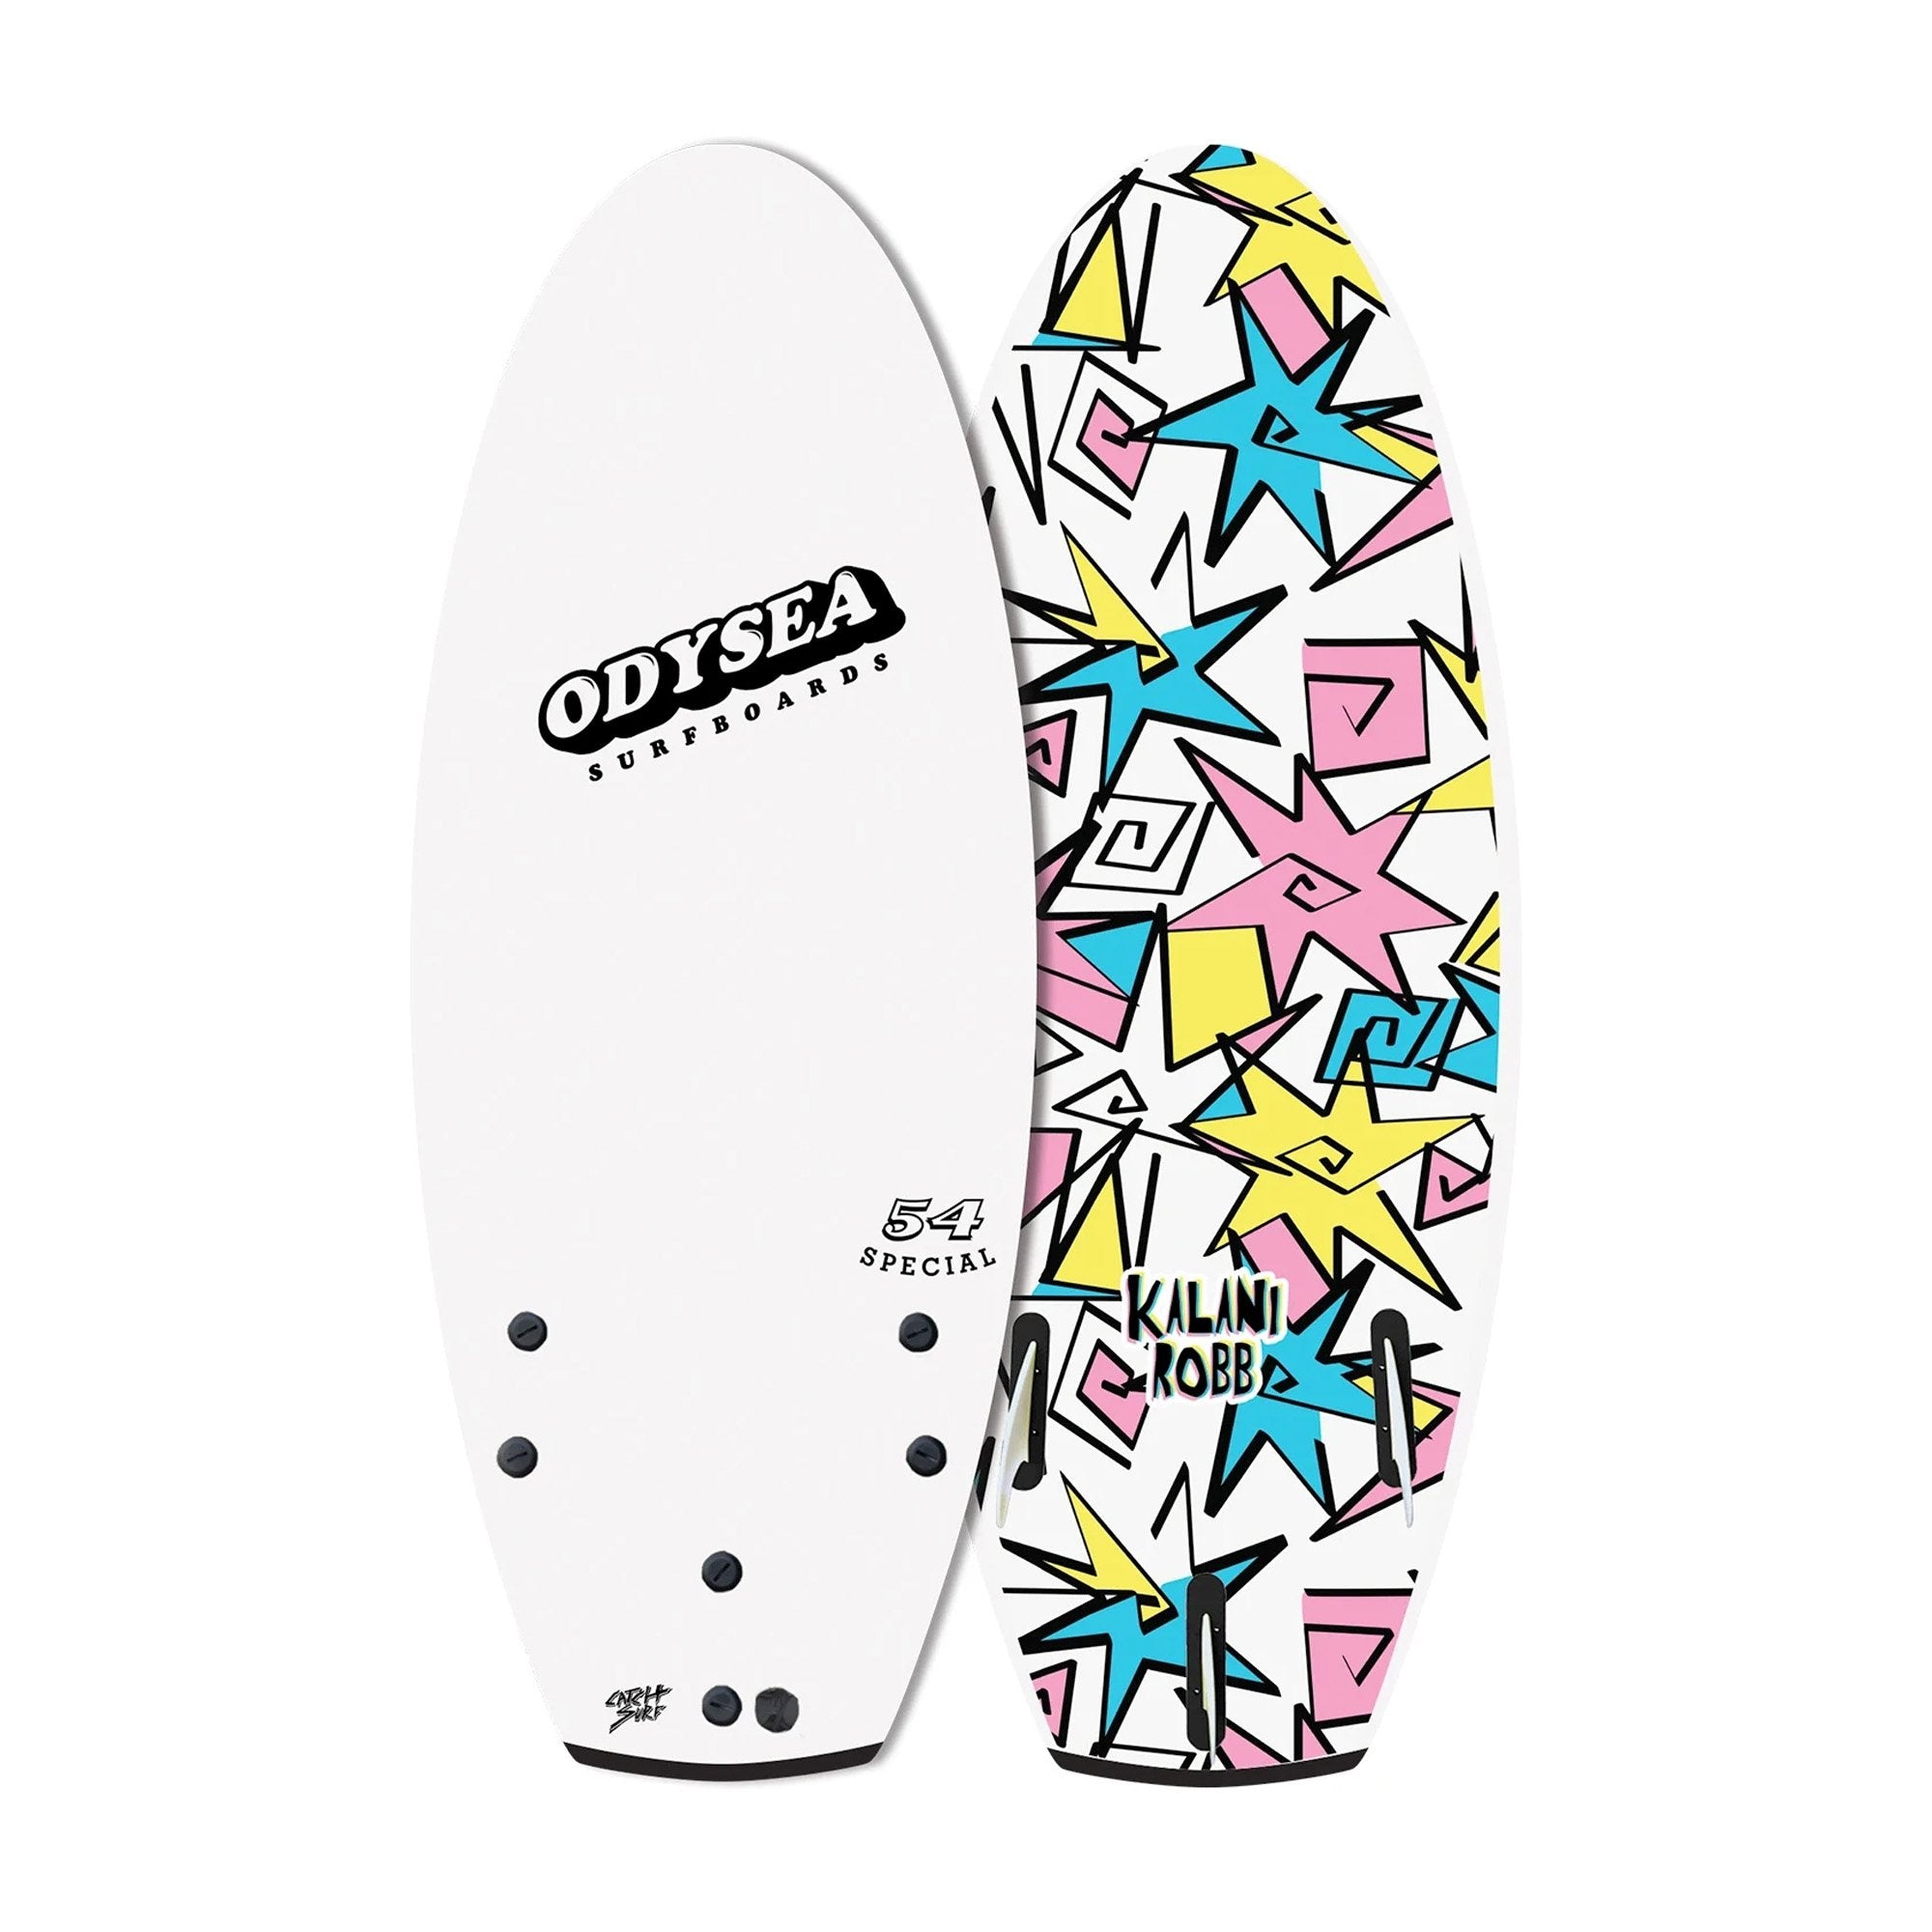 Catch Surf Odysea 54 Special Team Thruster Soft Surfboard